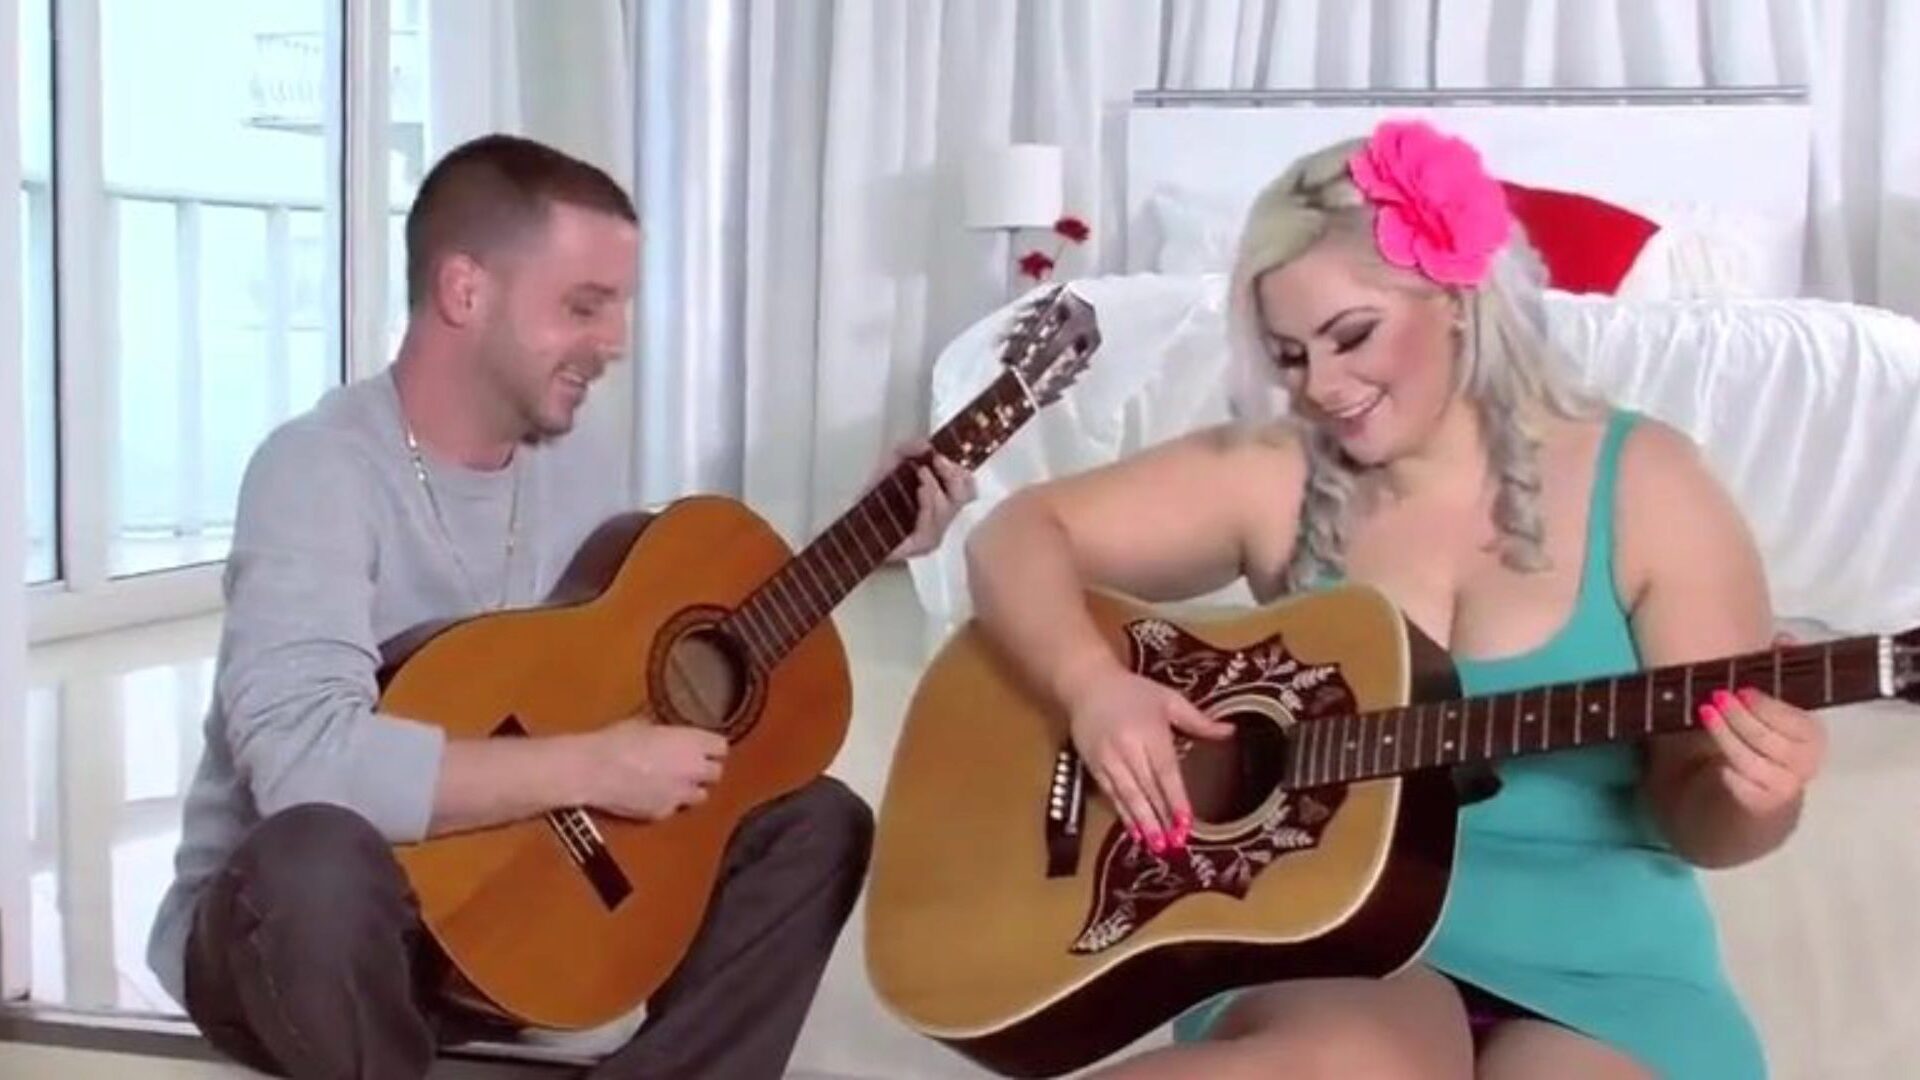 Hawt big marvelous lady Blond Copulates Her Guitar Instructor in Nylons